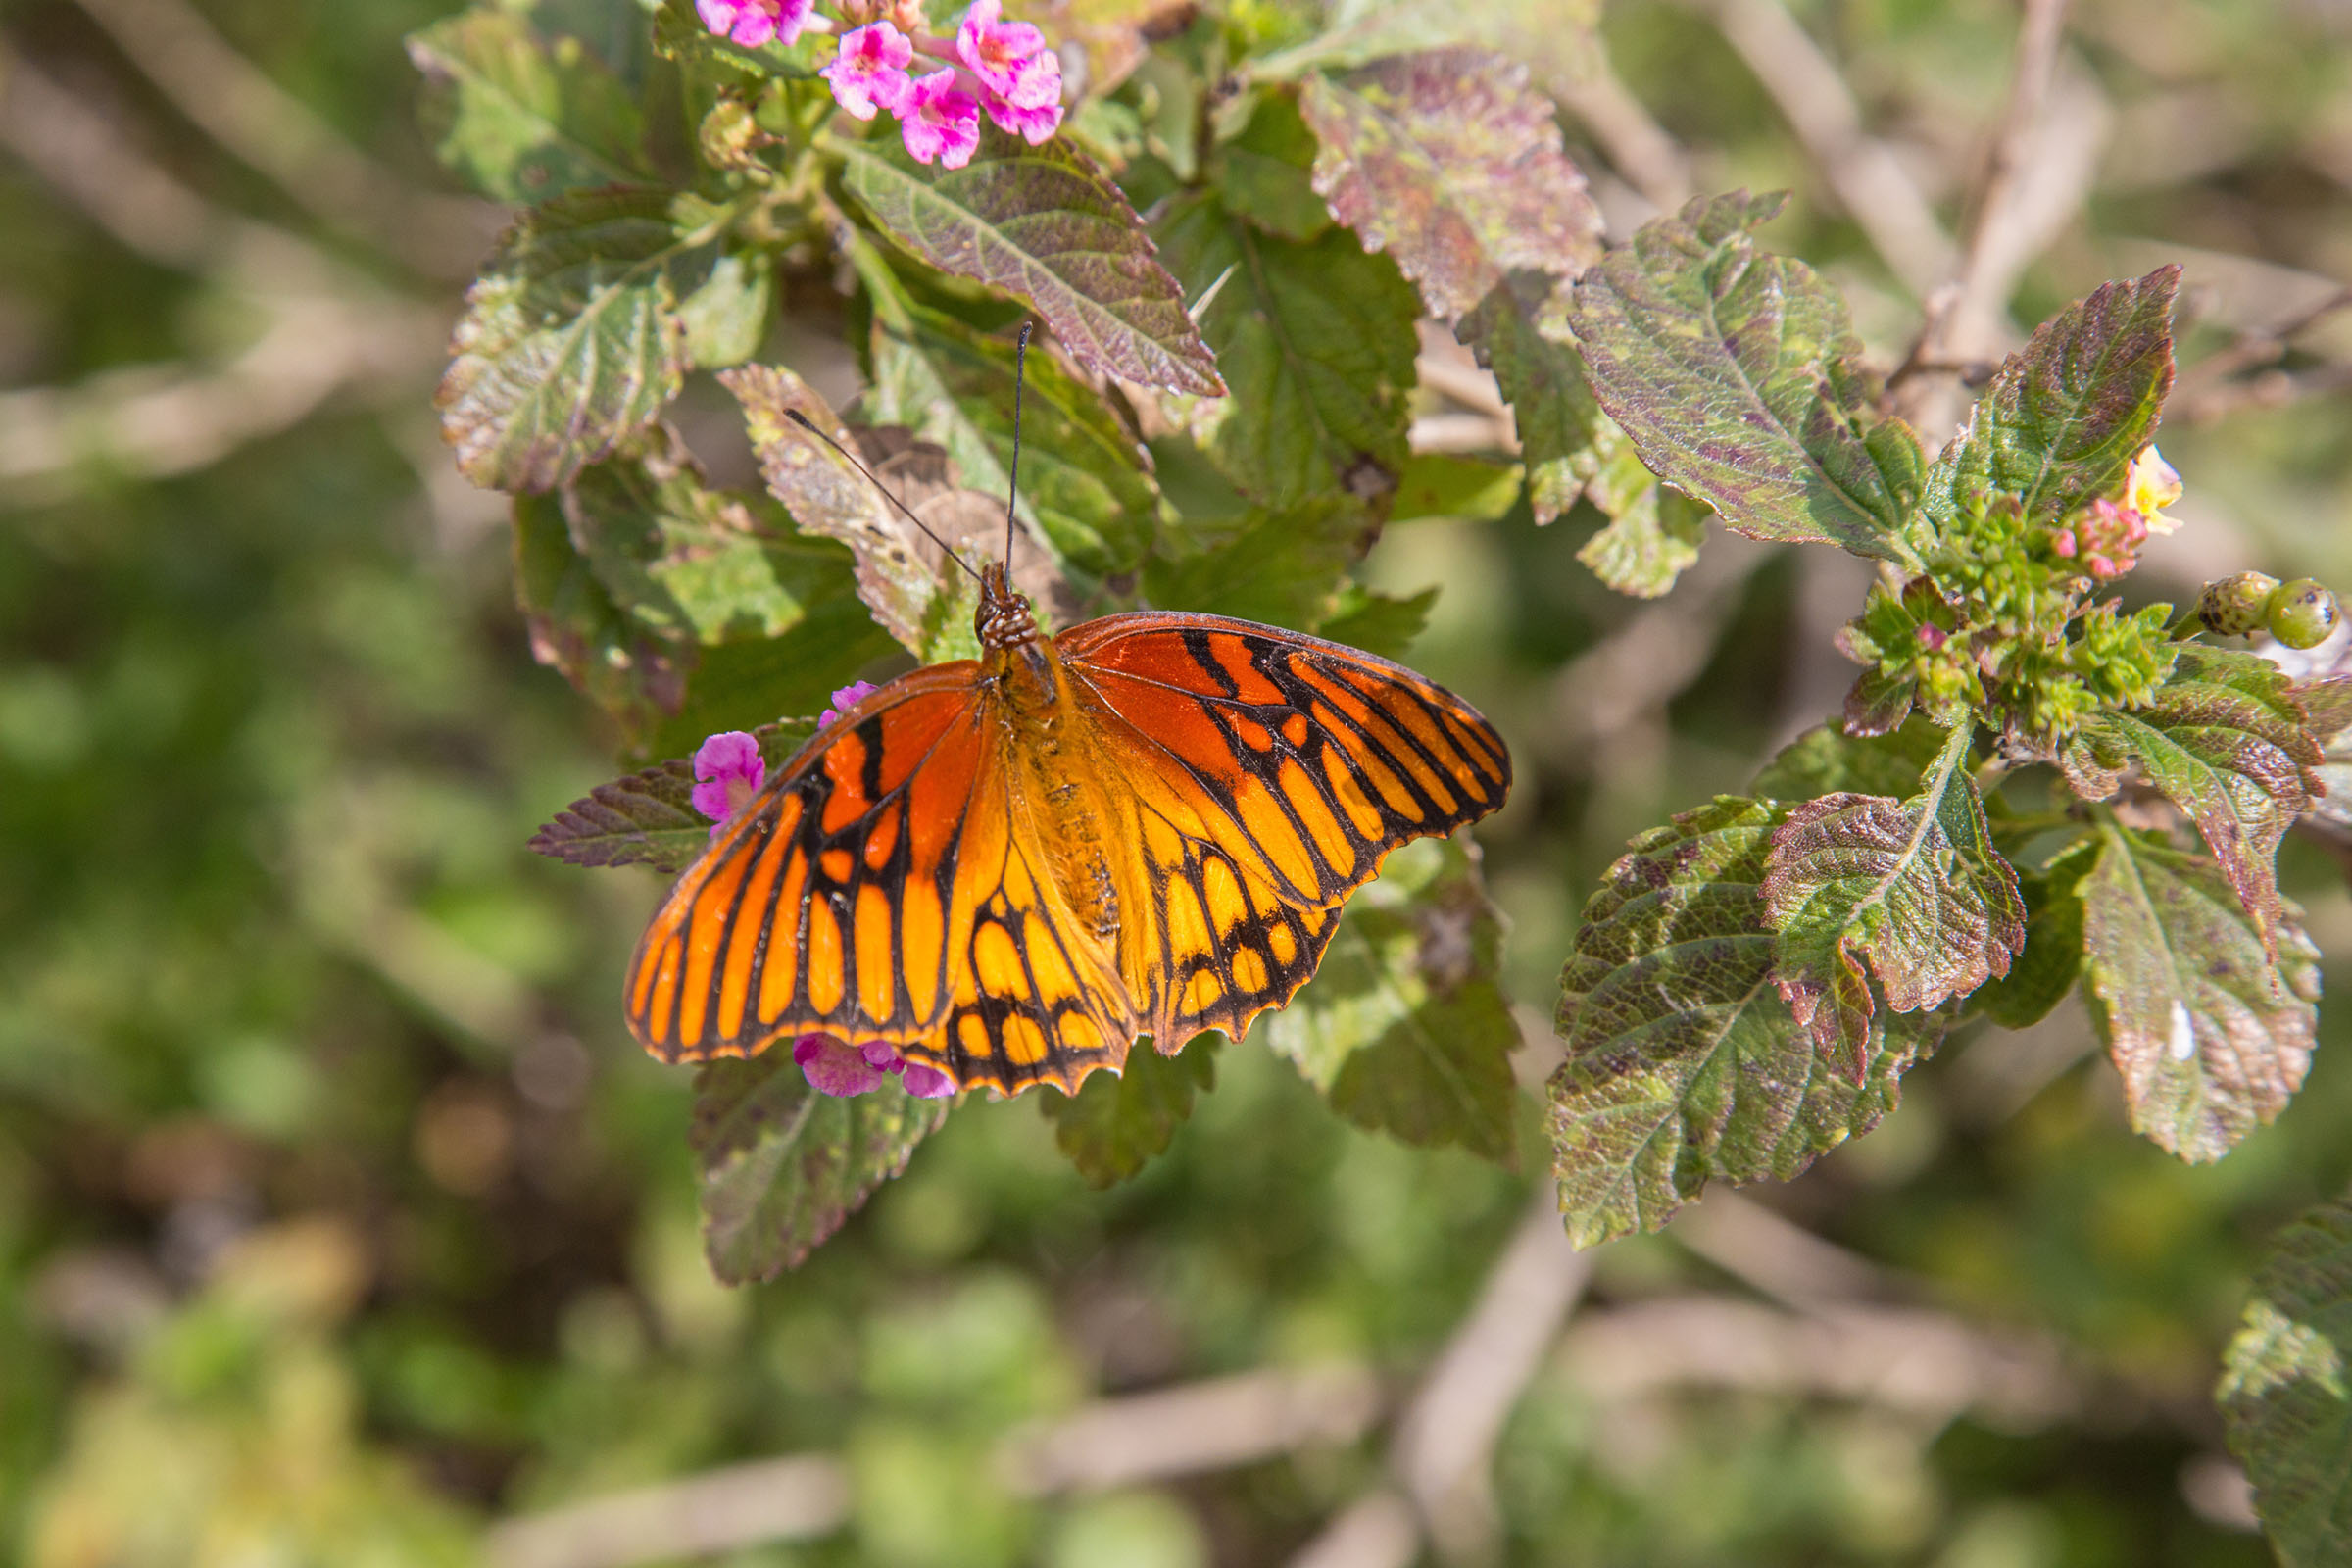 A red and orange butterfly perched on top of a pink flower.